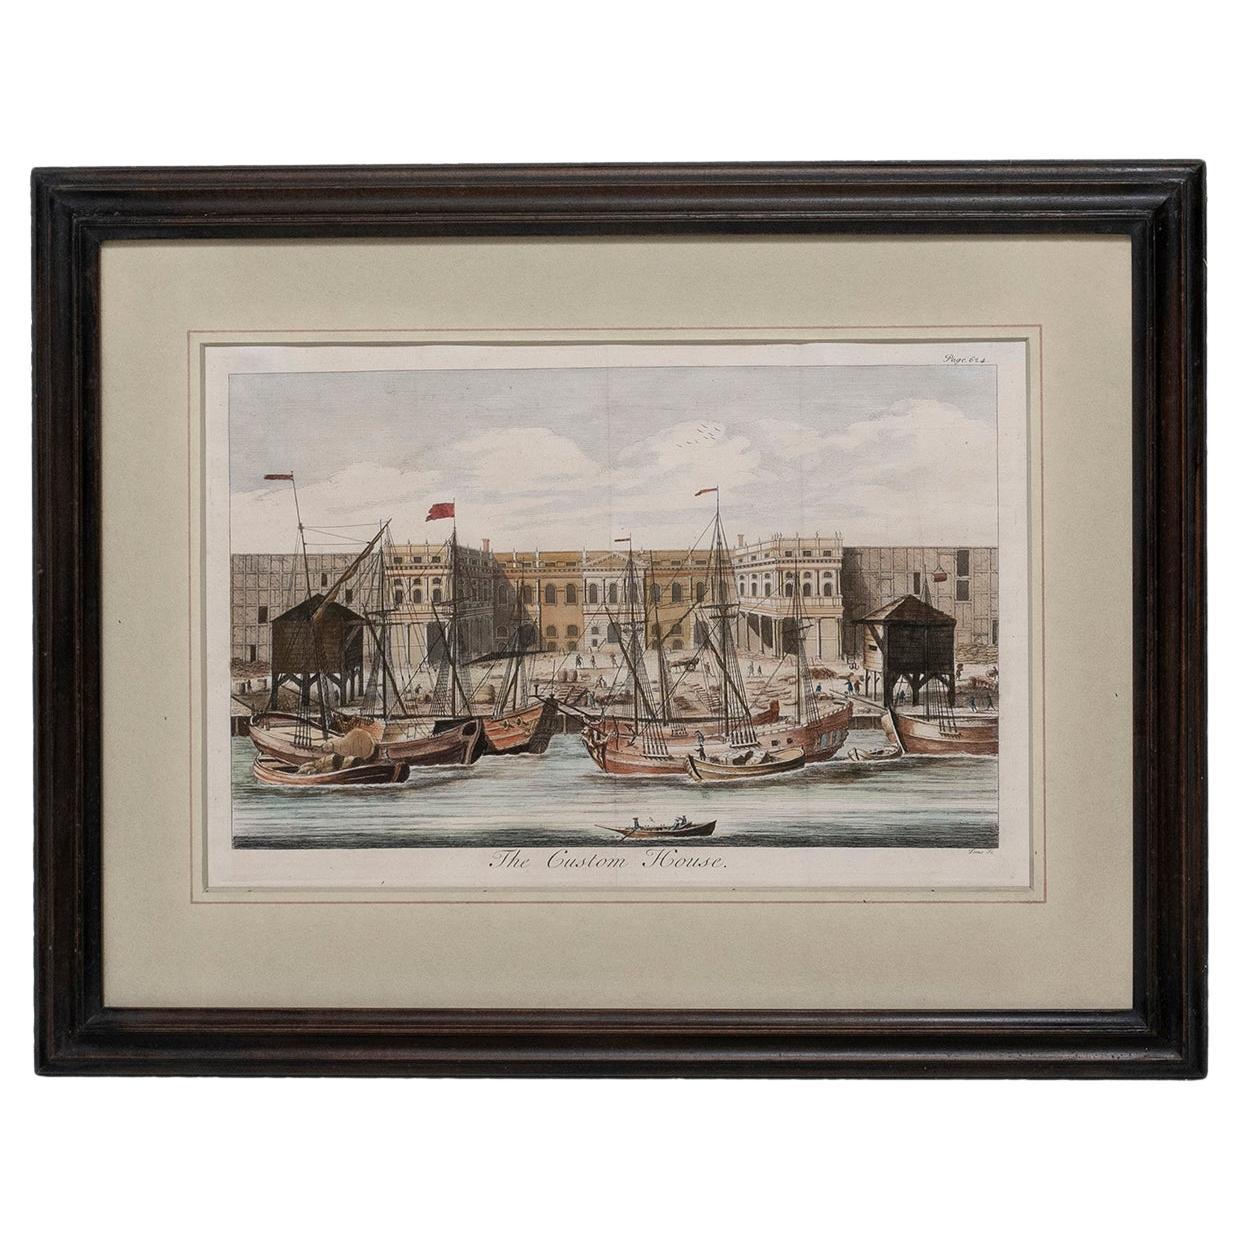 Print, Hand-Colored, Copperplate, Engraved, Custom House, William Maitland